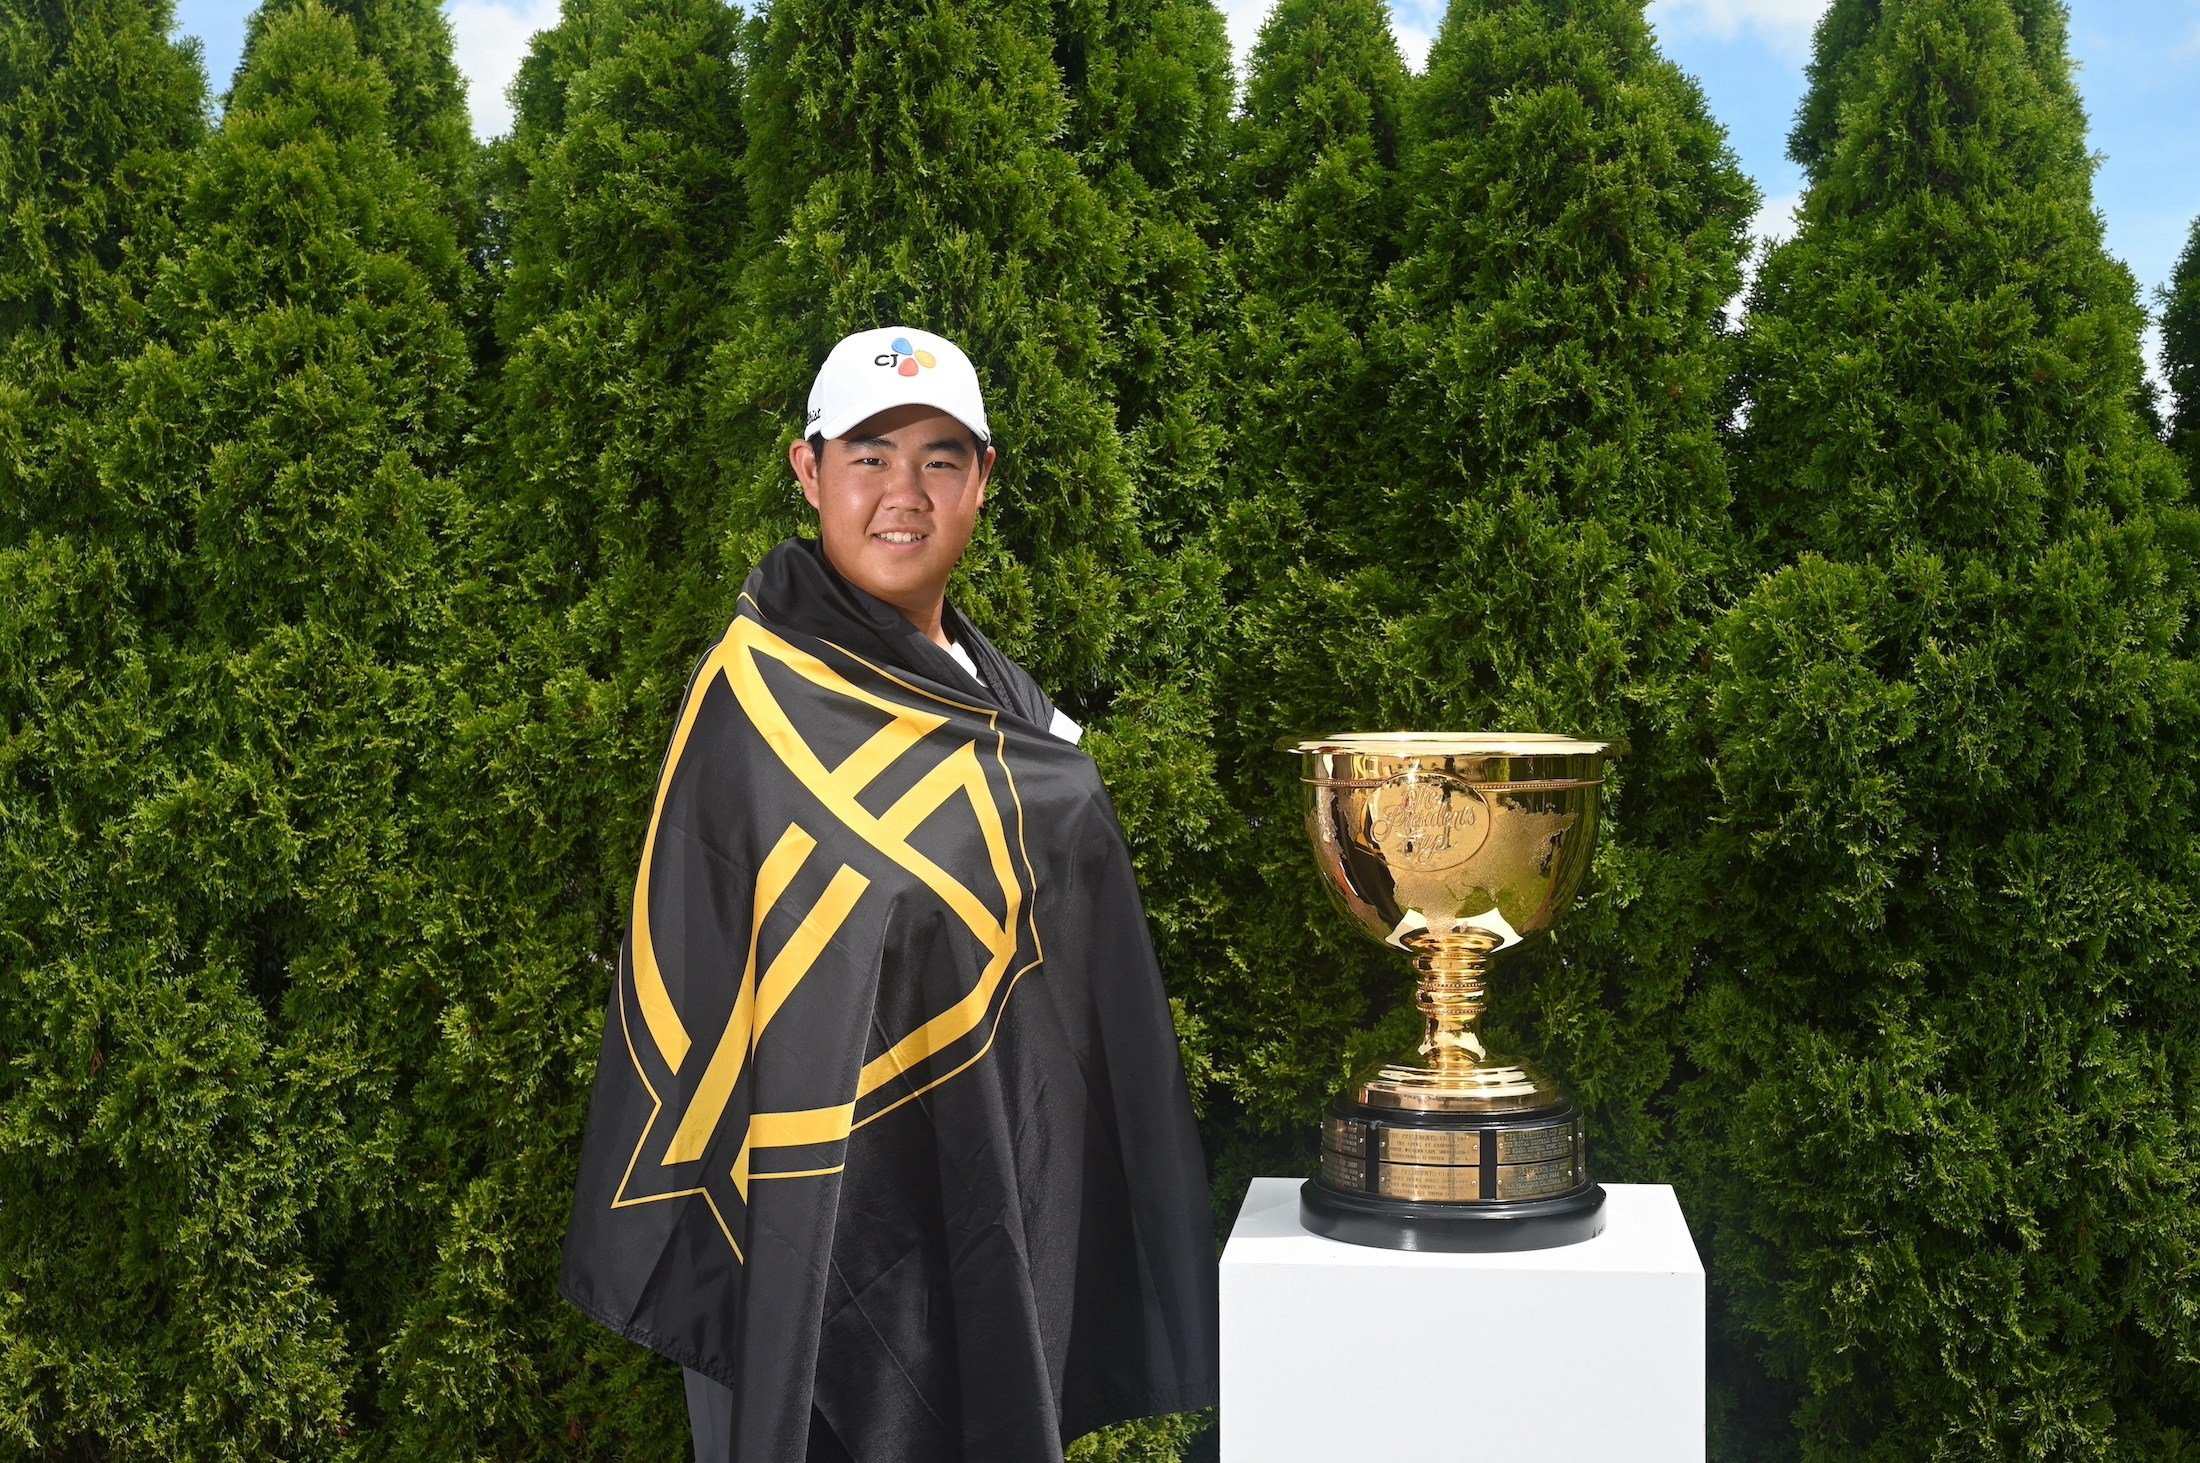 Joohyung Kim with the International Team flag and Presidents Cup. Photo: PGA Tour